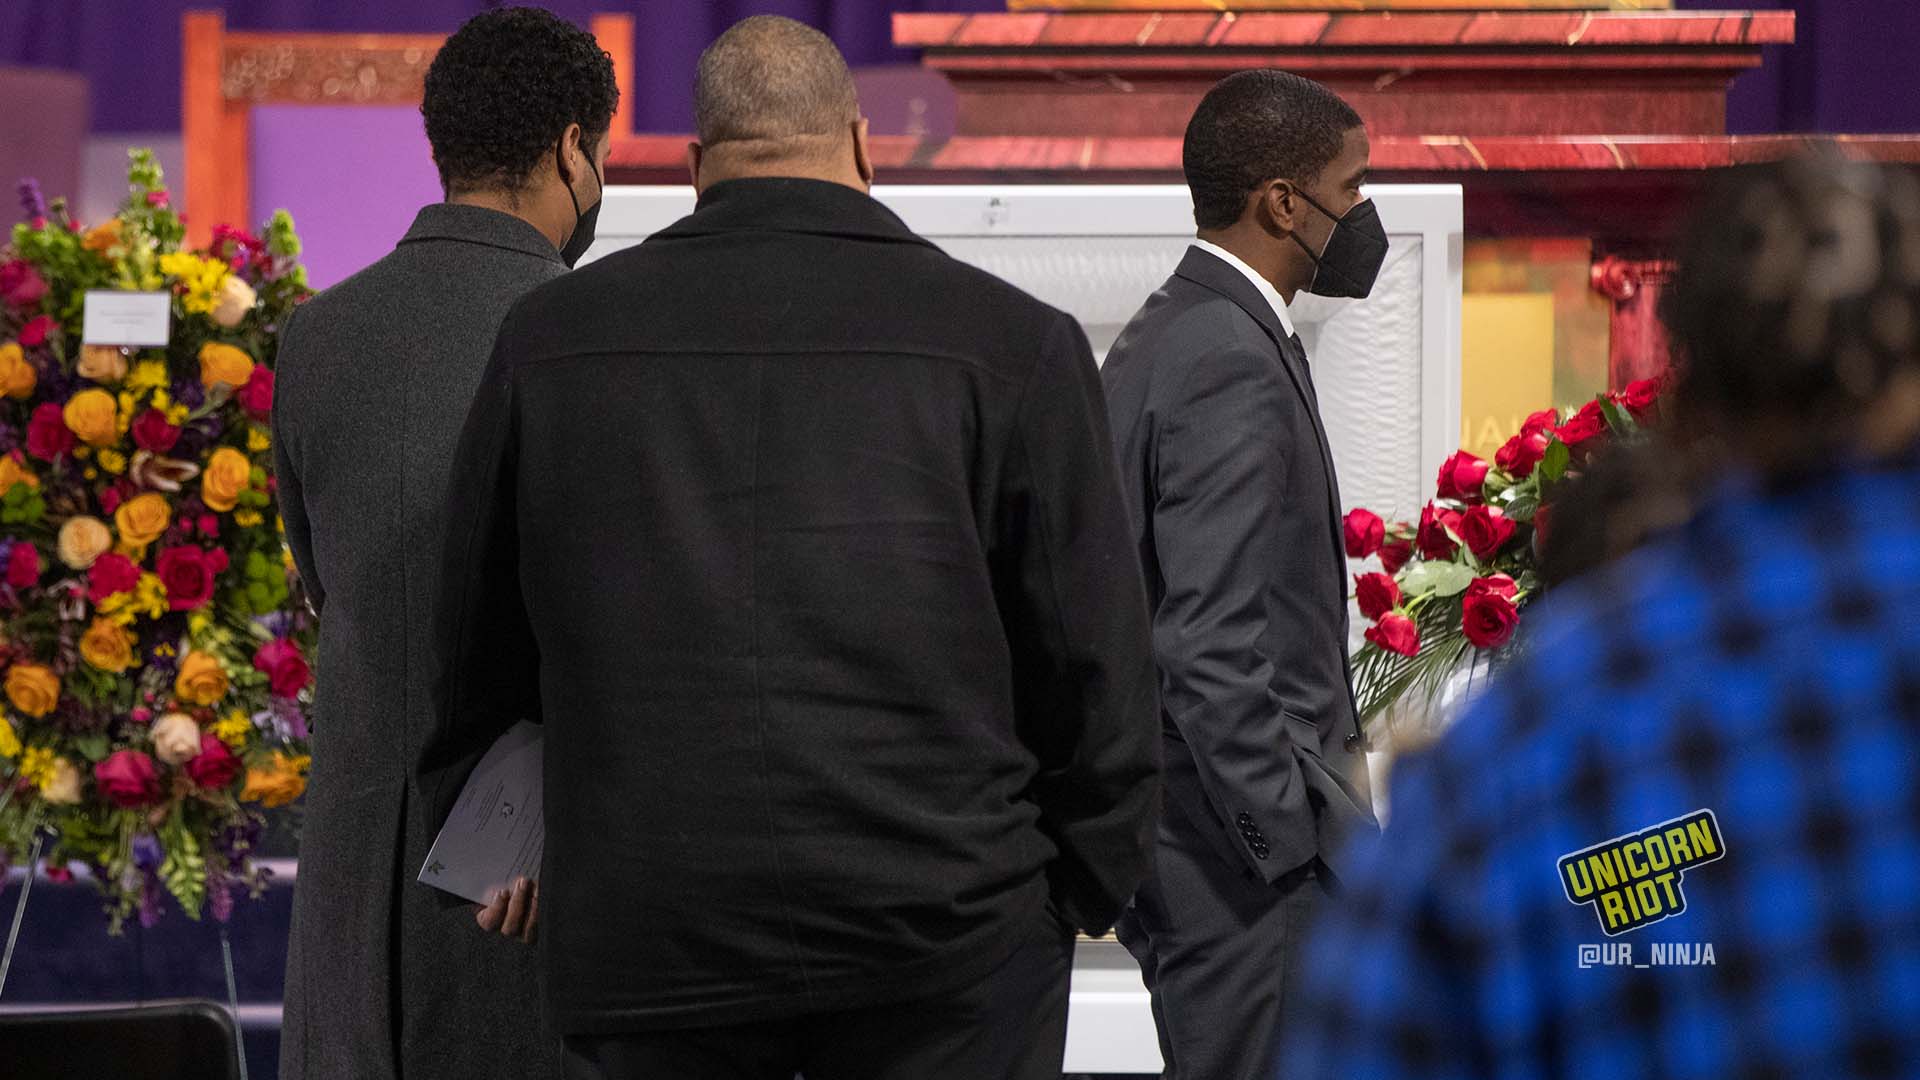 February 17, 2022, Minneapolis, MN: Saint Paul Mayor Melvin Carter pays his respect at the casket of Amir Locke before the start of the funeral at Shiloh Temple.